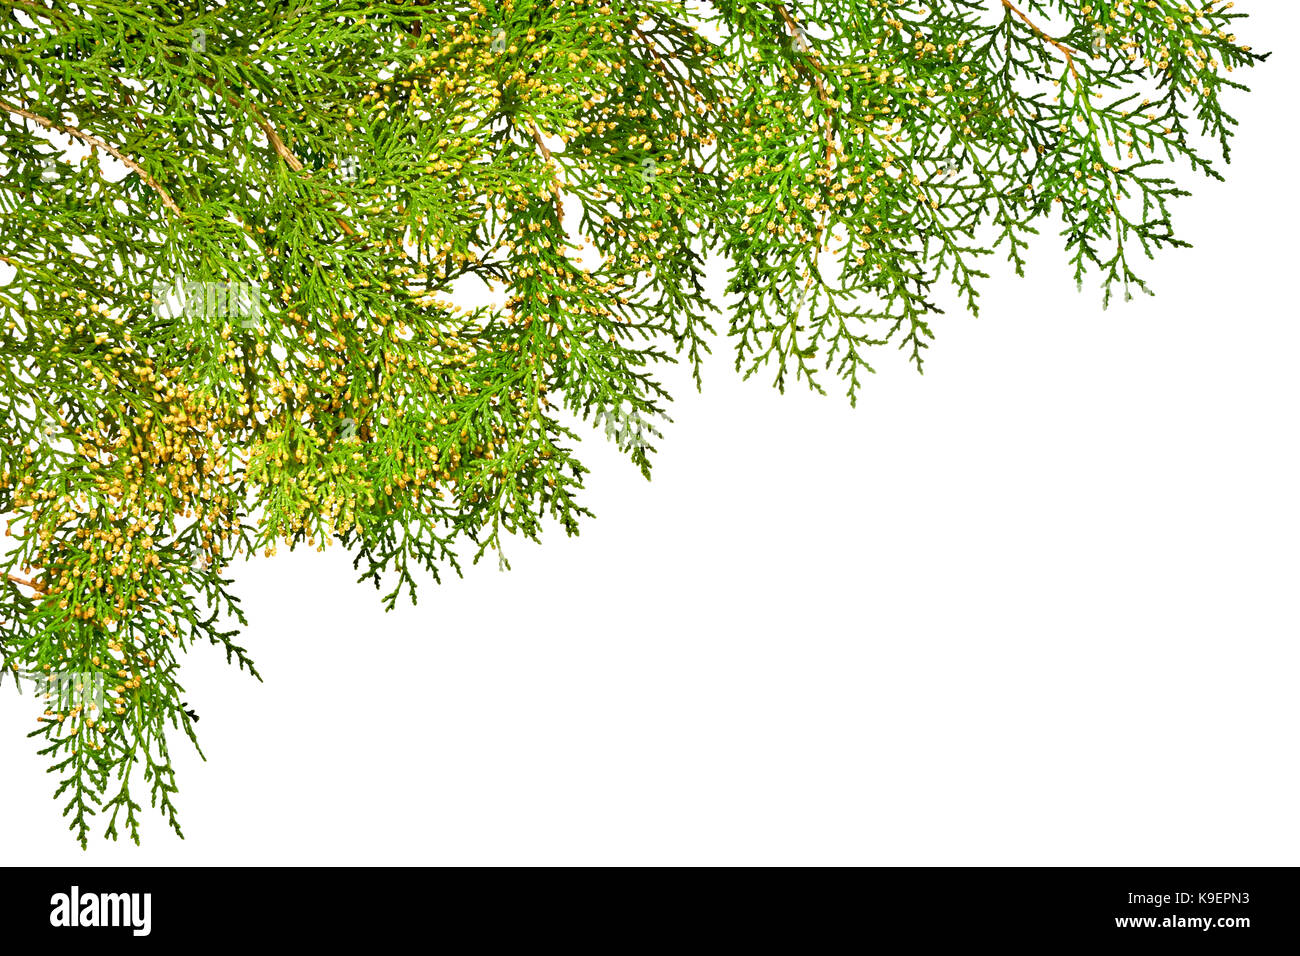 Green thuja twig with flowers on a white background. Stock Photo